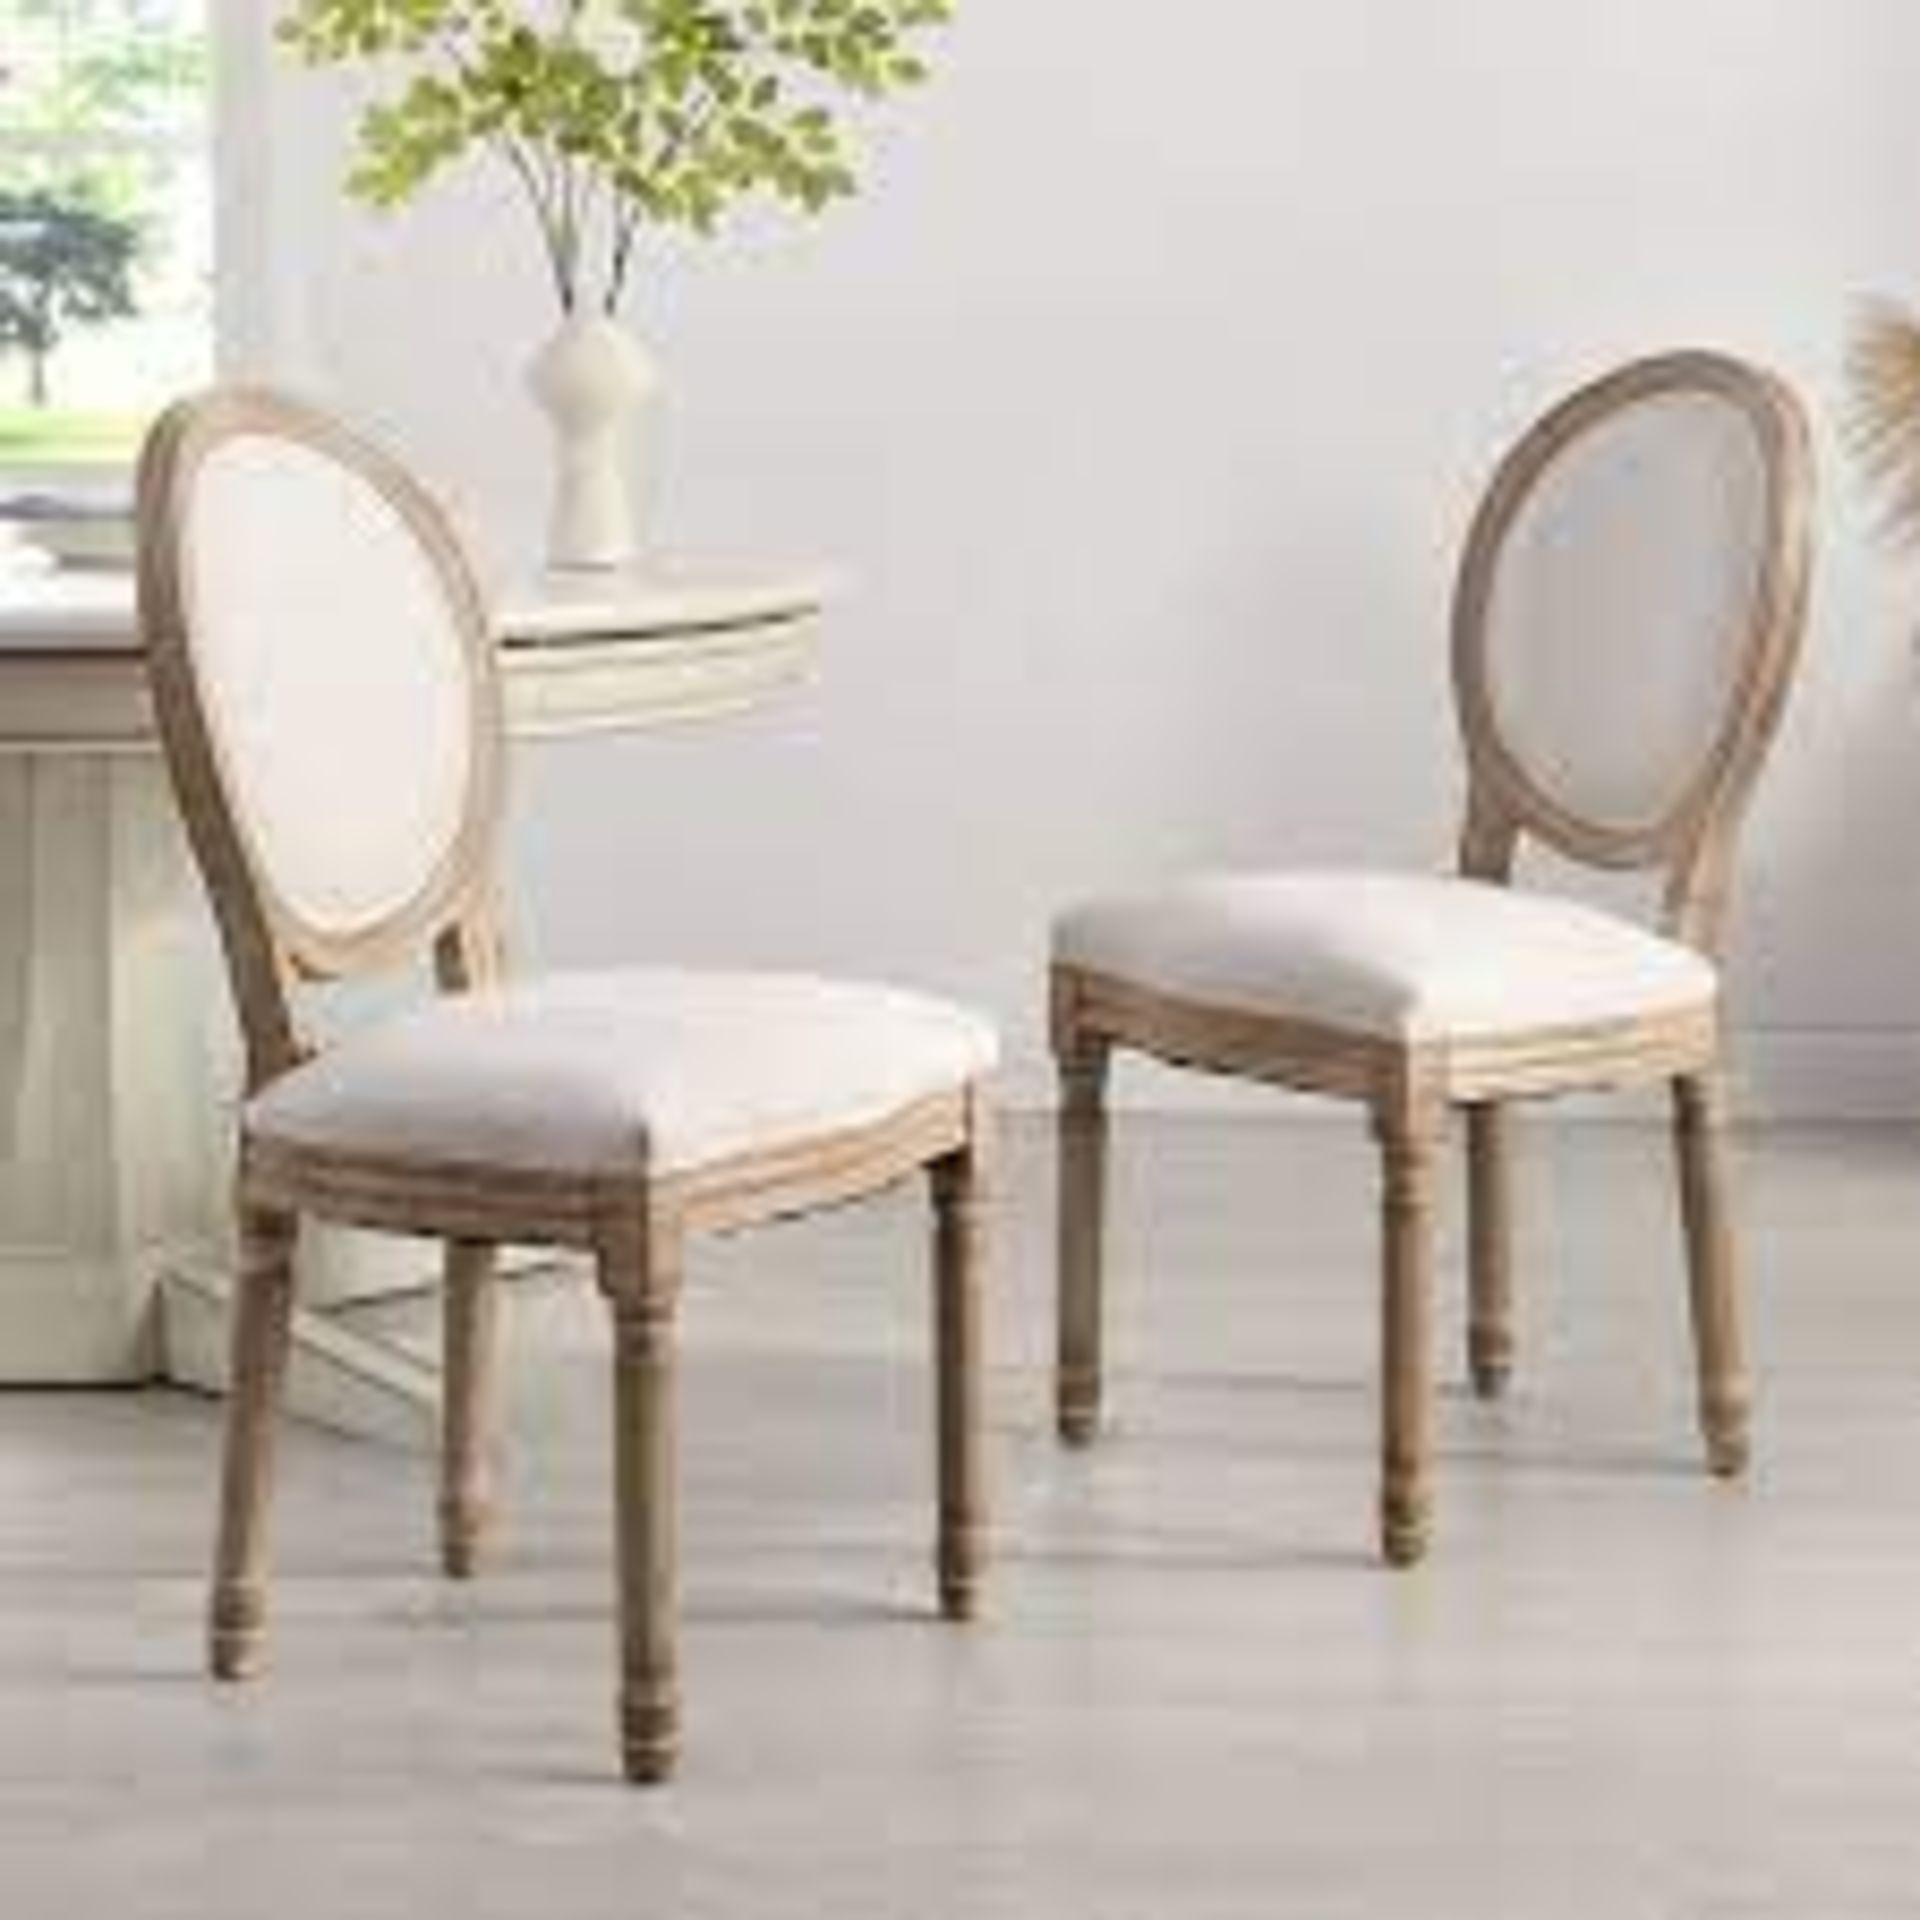 Lainston Set of 2 Classic Limewashed Wooden Dining Chairs, Beige - SR4